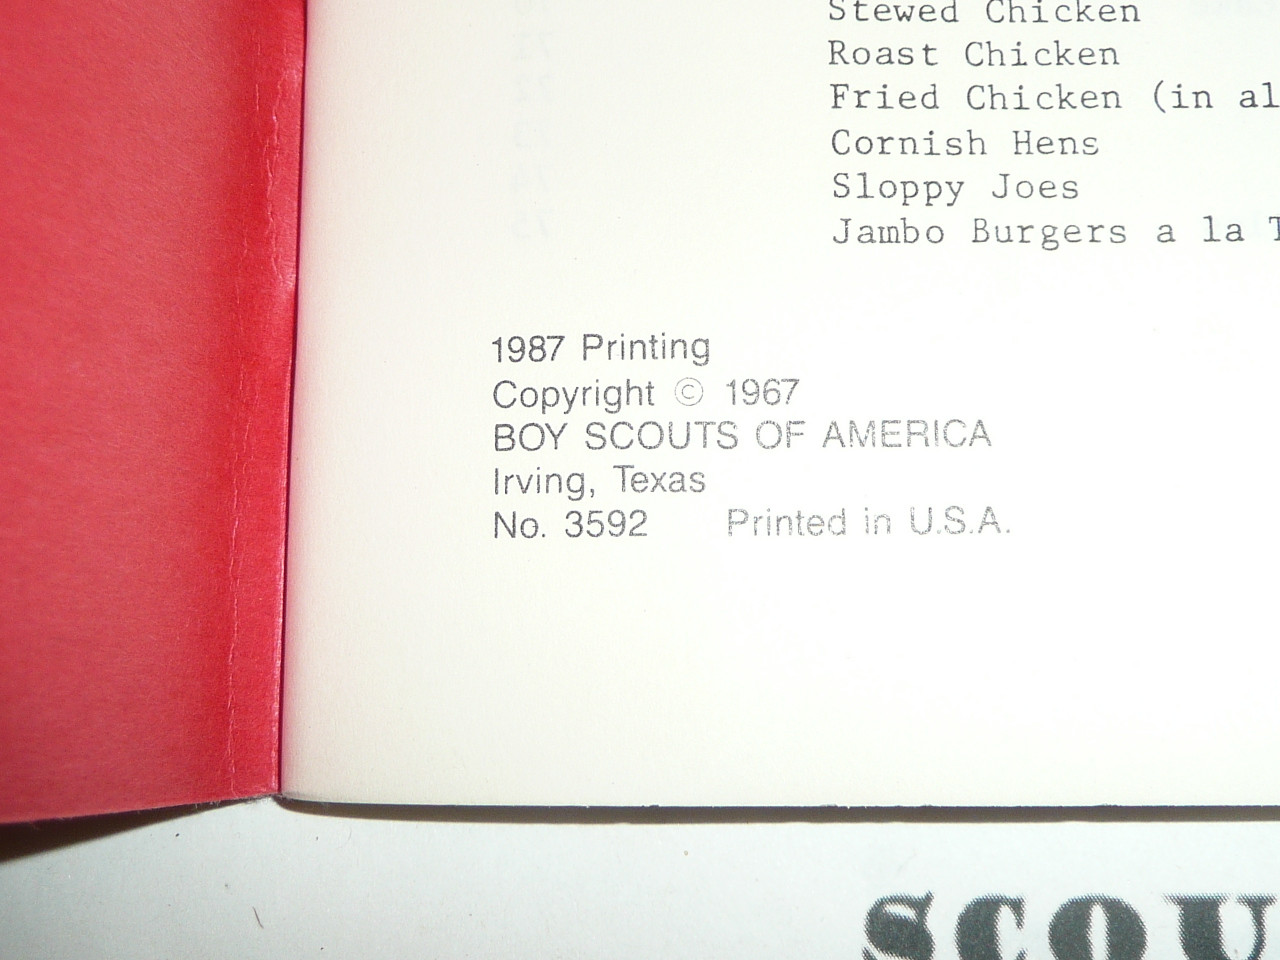 1987 Camp Cookery For Small Groups, Boy Scouts of America